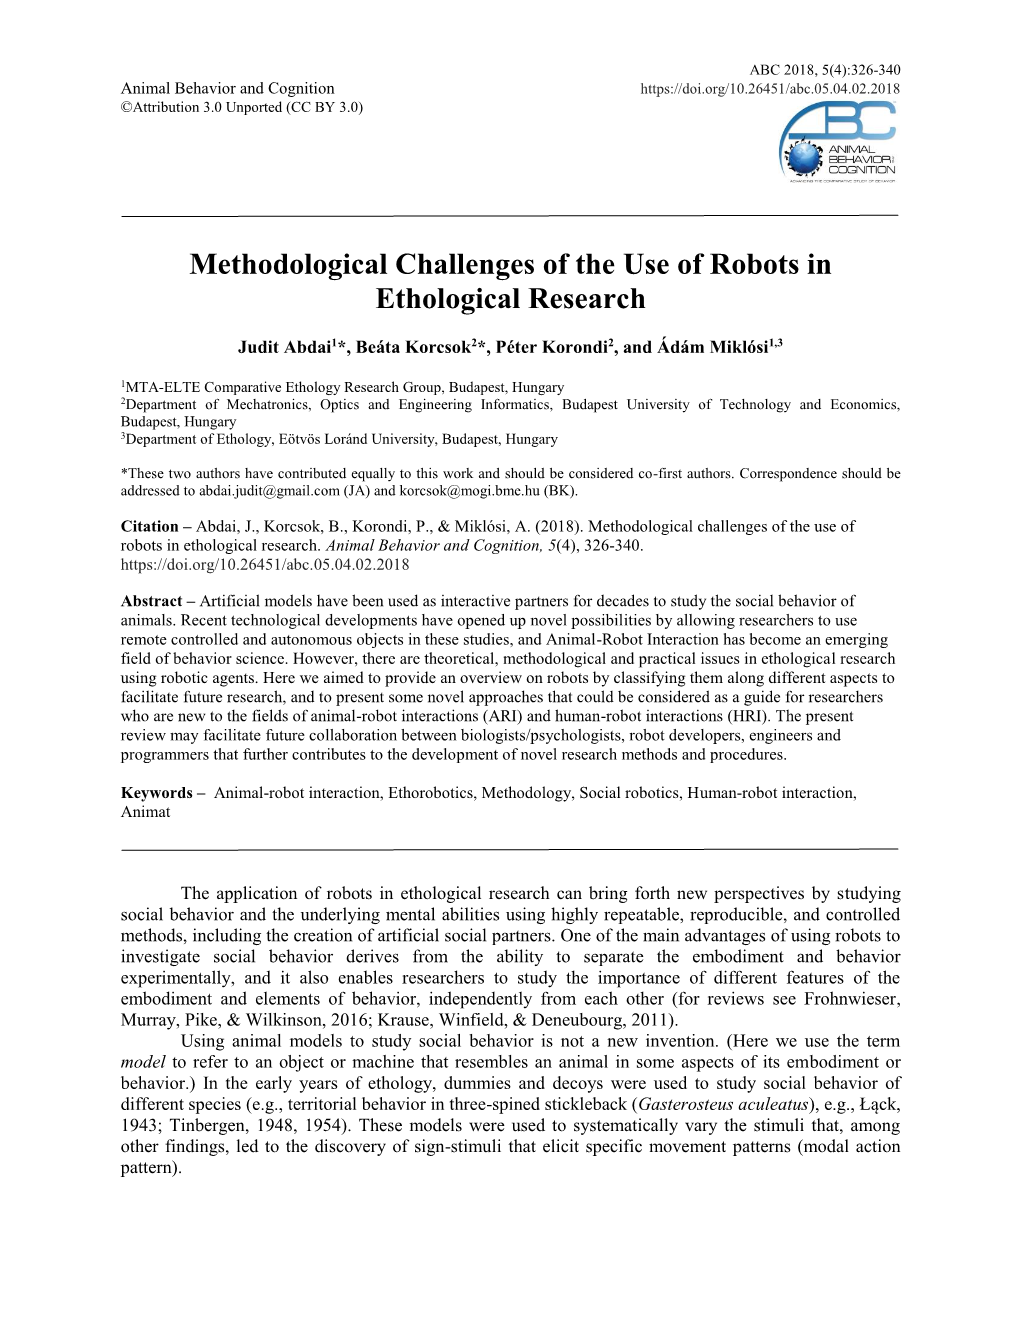 Methodological Challenges of the Use of Robots in Ethological Research